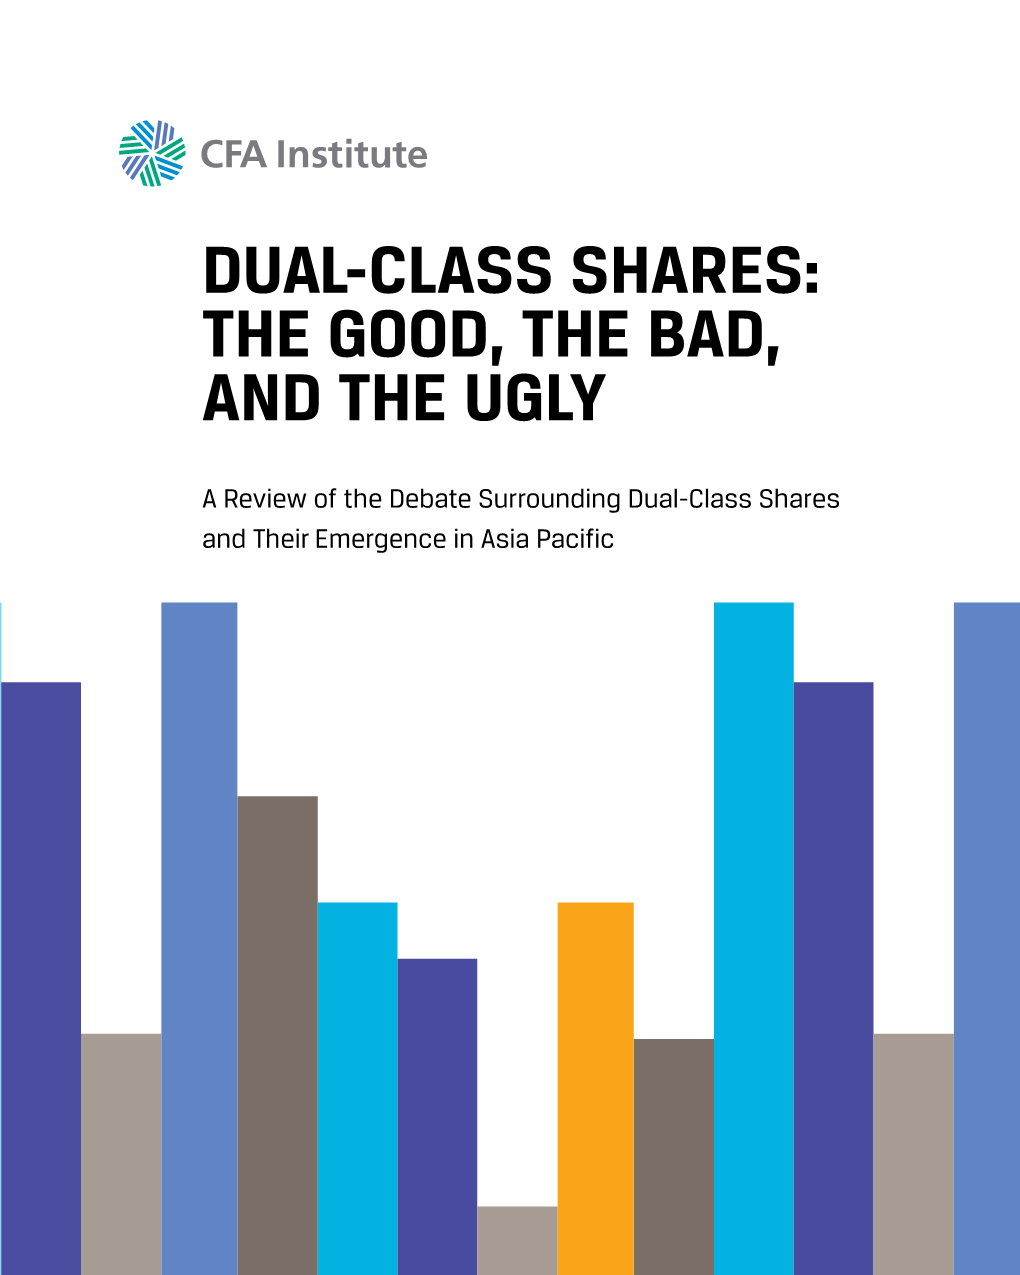 Dual-Class Shares: the Good, the Bad, and the Ugly